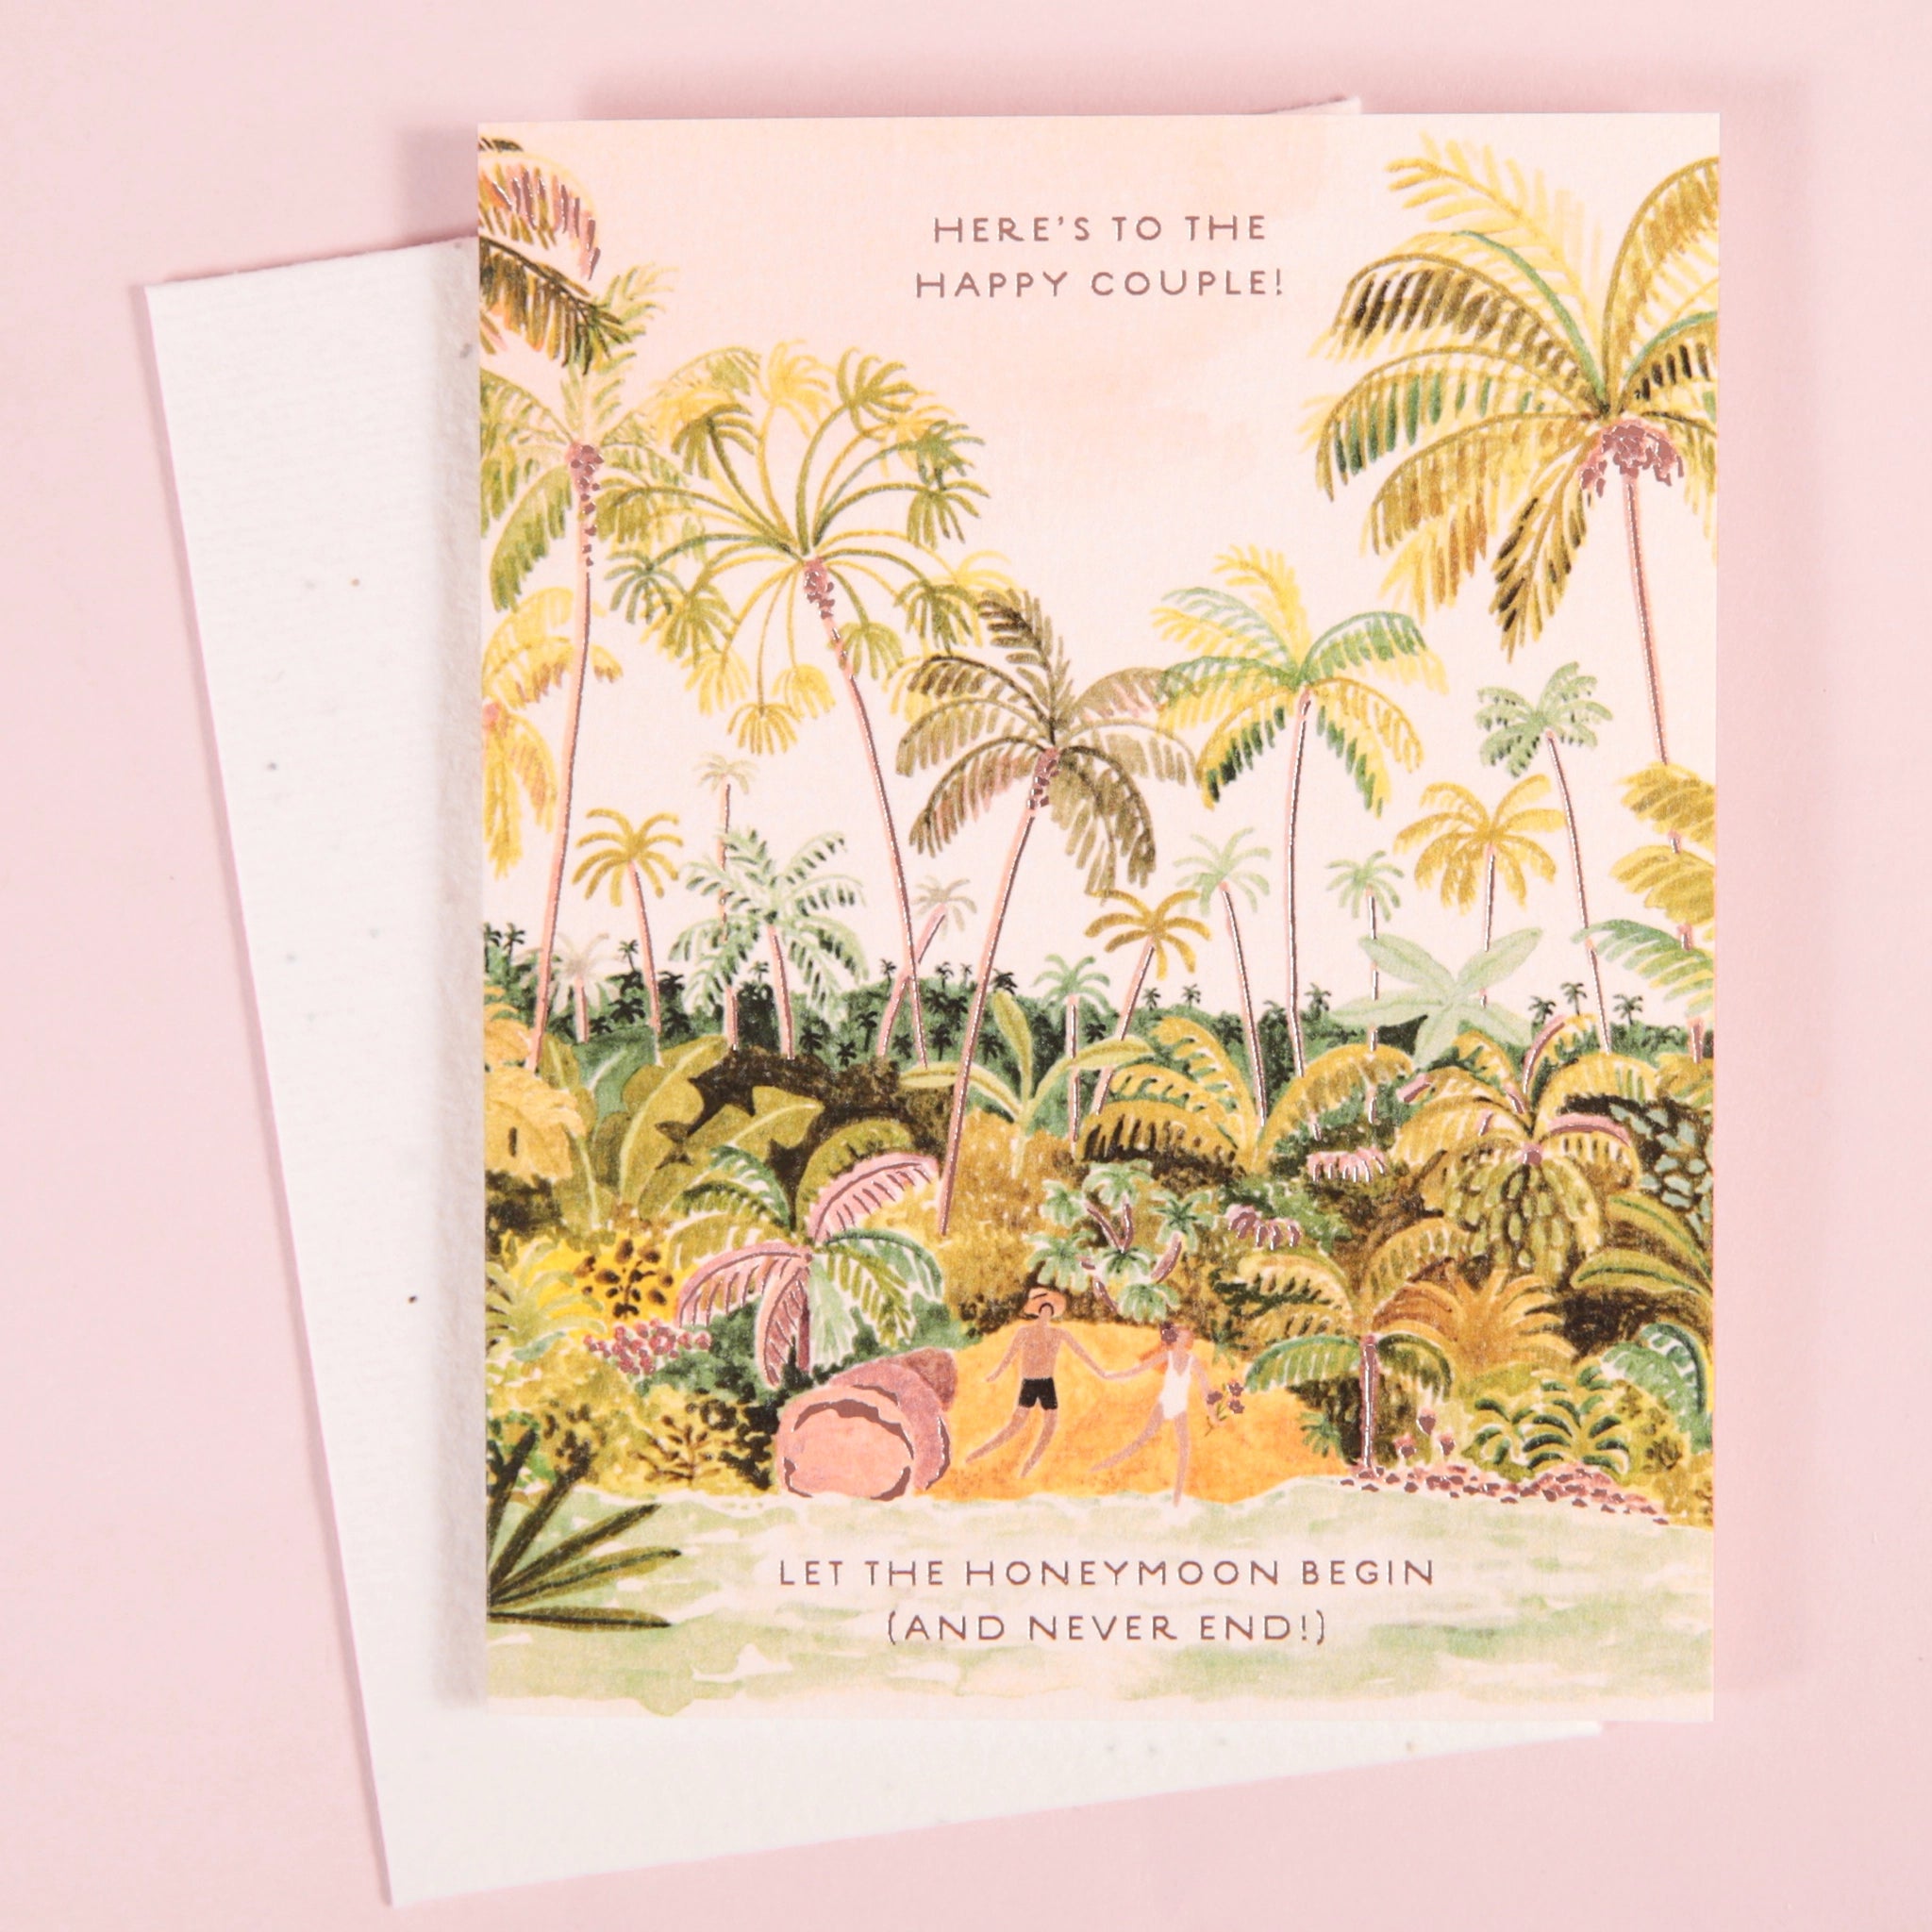 On a light pink background is a white envelope and card with a lush tropical illustration filled with palm trees and a couple holding hands on a beach toward the bottom along with text that reads, &quot;Here&#39;s to the happy couple! Let the honeymoon begin (and never end!)&quot;.